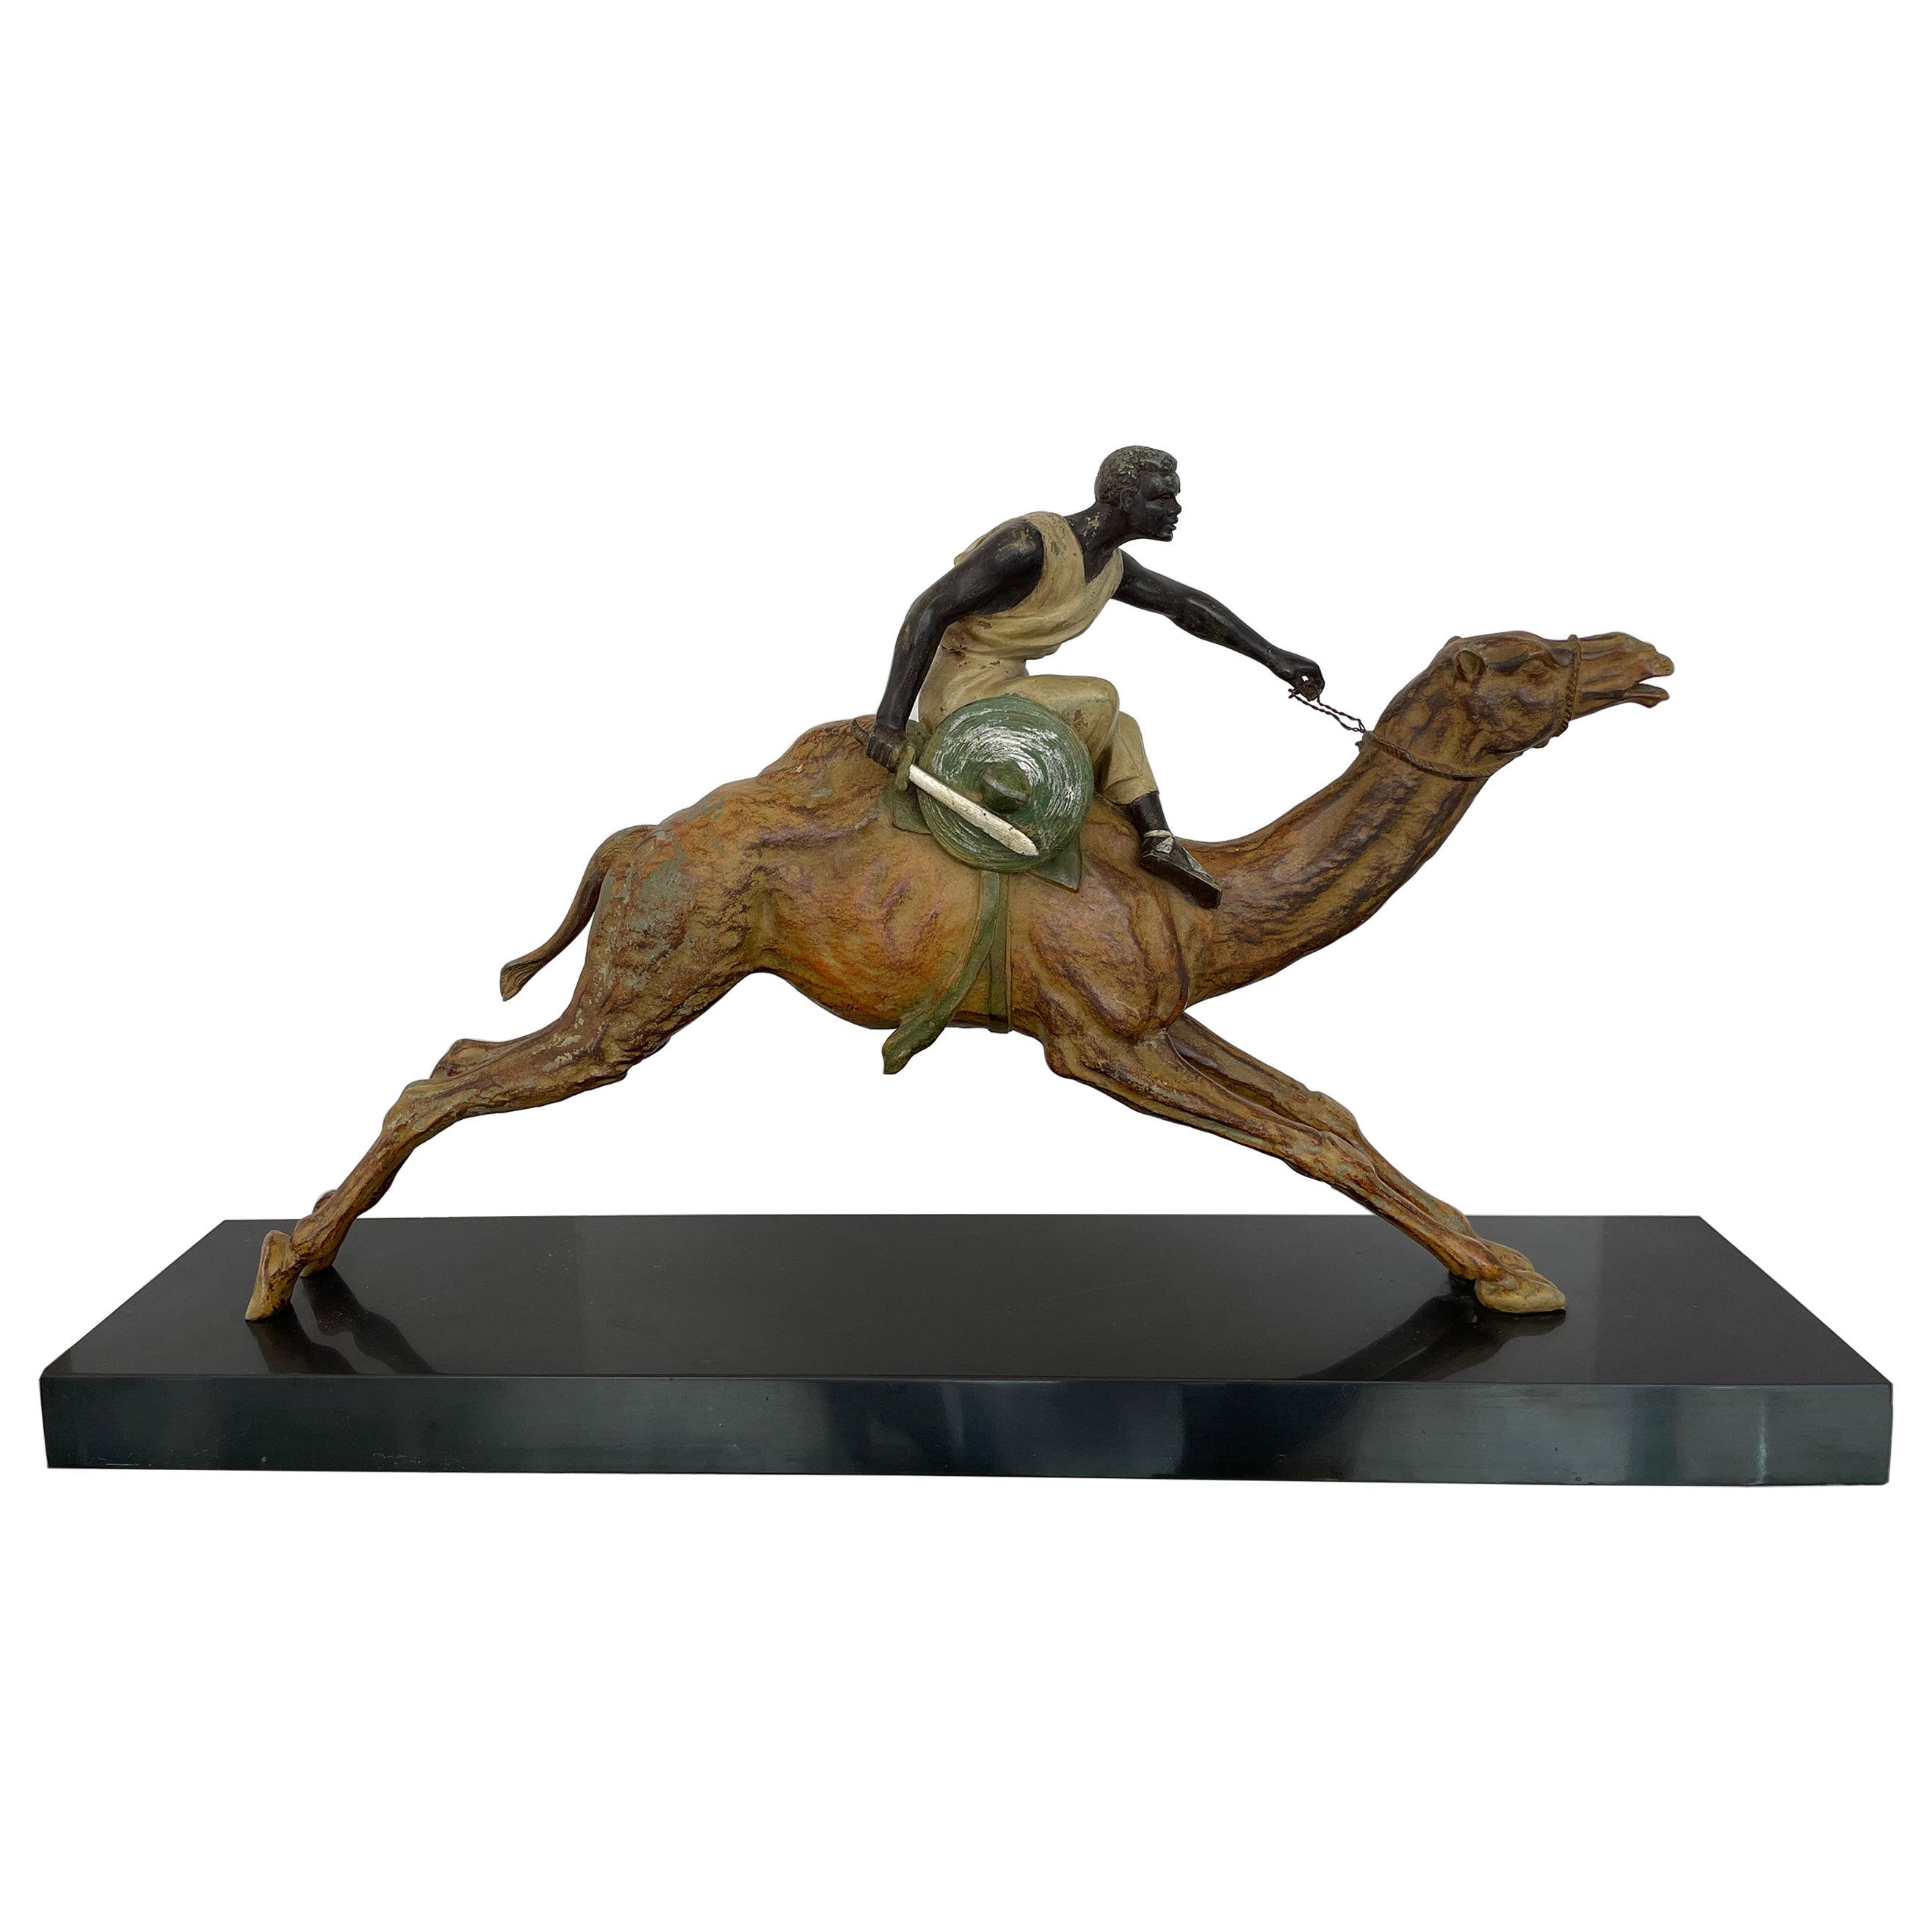 "Vienna Bronze" Style Sculpture of a Camel and Rider For Sale